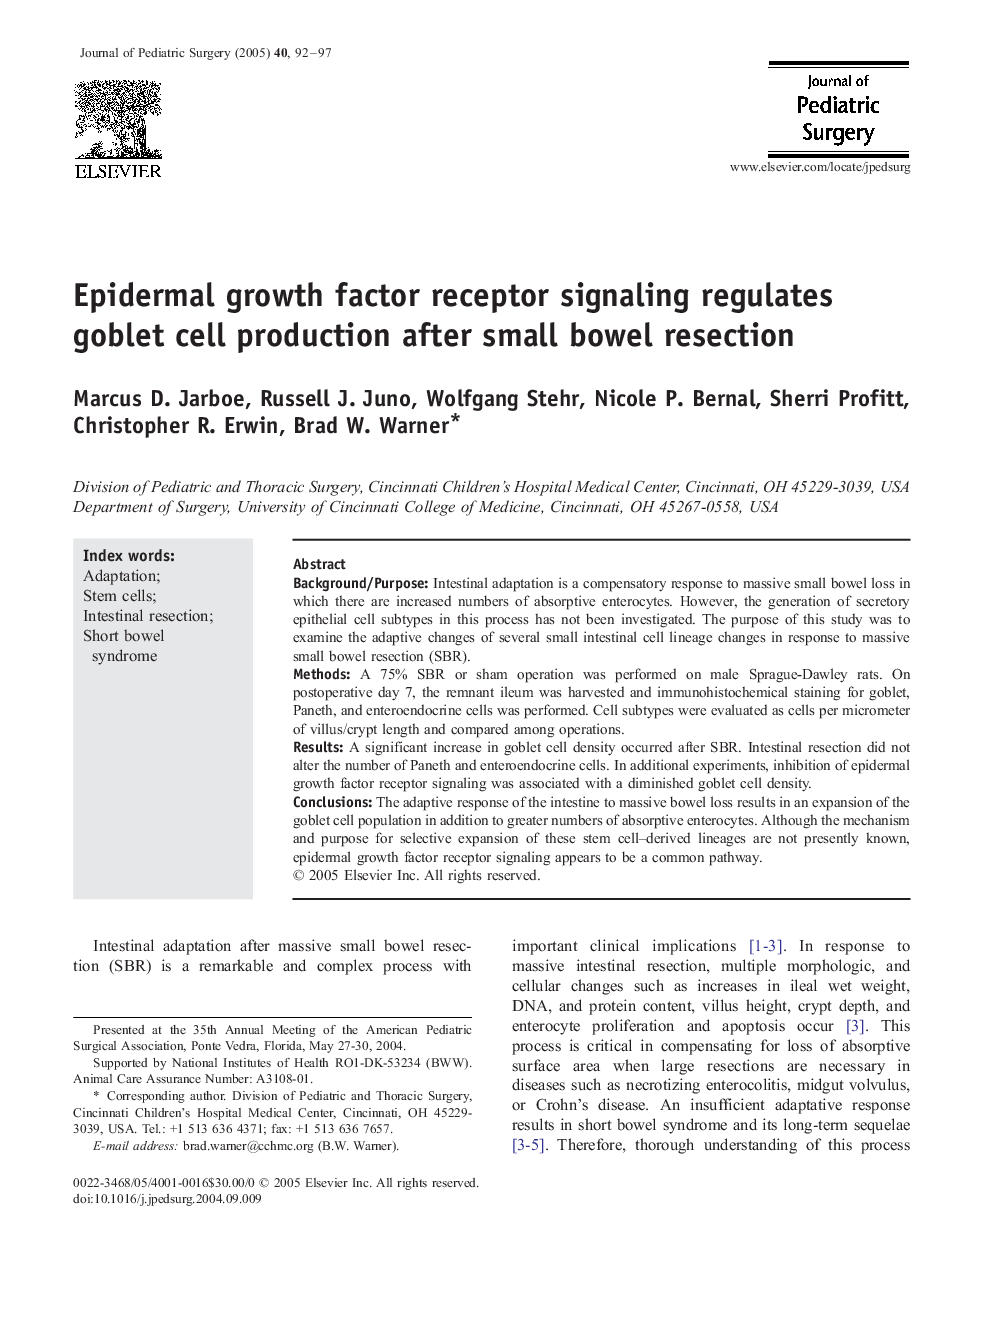 Epidermal growth factor receptor signaling regulates goblet cell production after small bowel resection